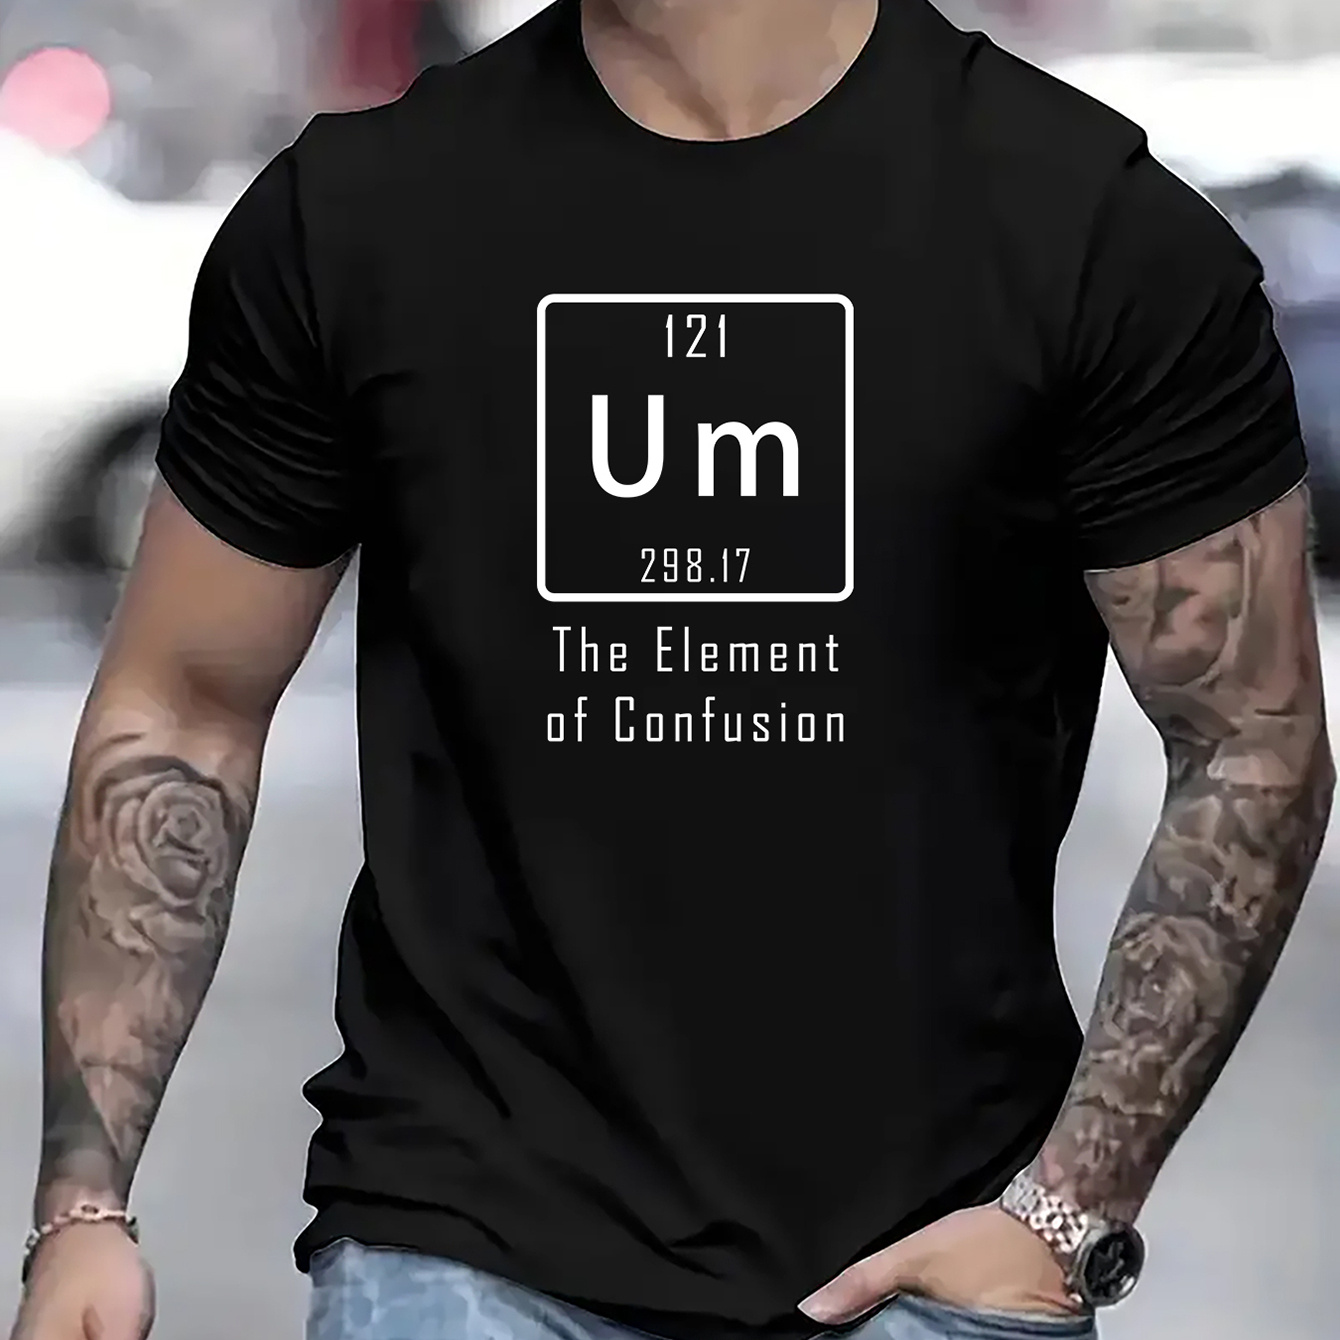 

Um The Element Of Confusion Letters Print Casual Crew Neck Short Sleeves For Men, Quick-drying Comfy Casual Summer T-shirt For Daily Wear Work Out And Vacation Resorts